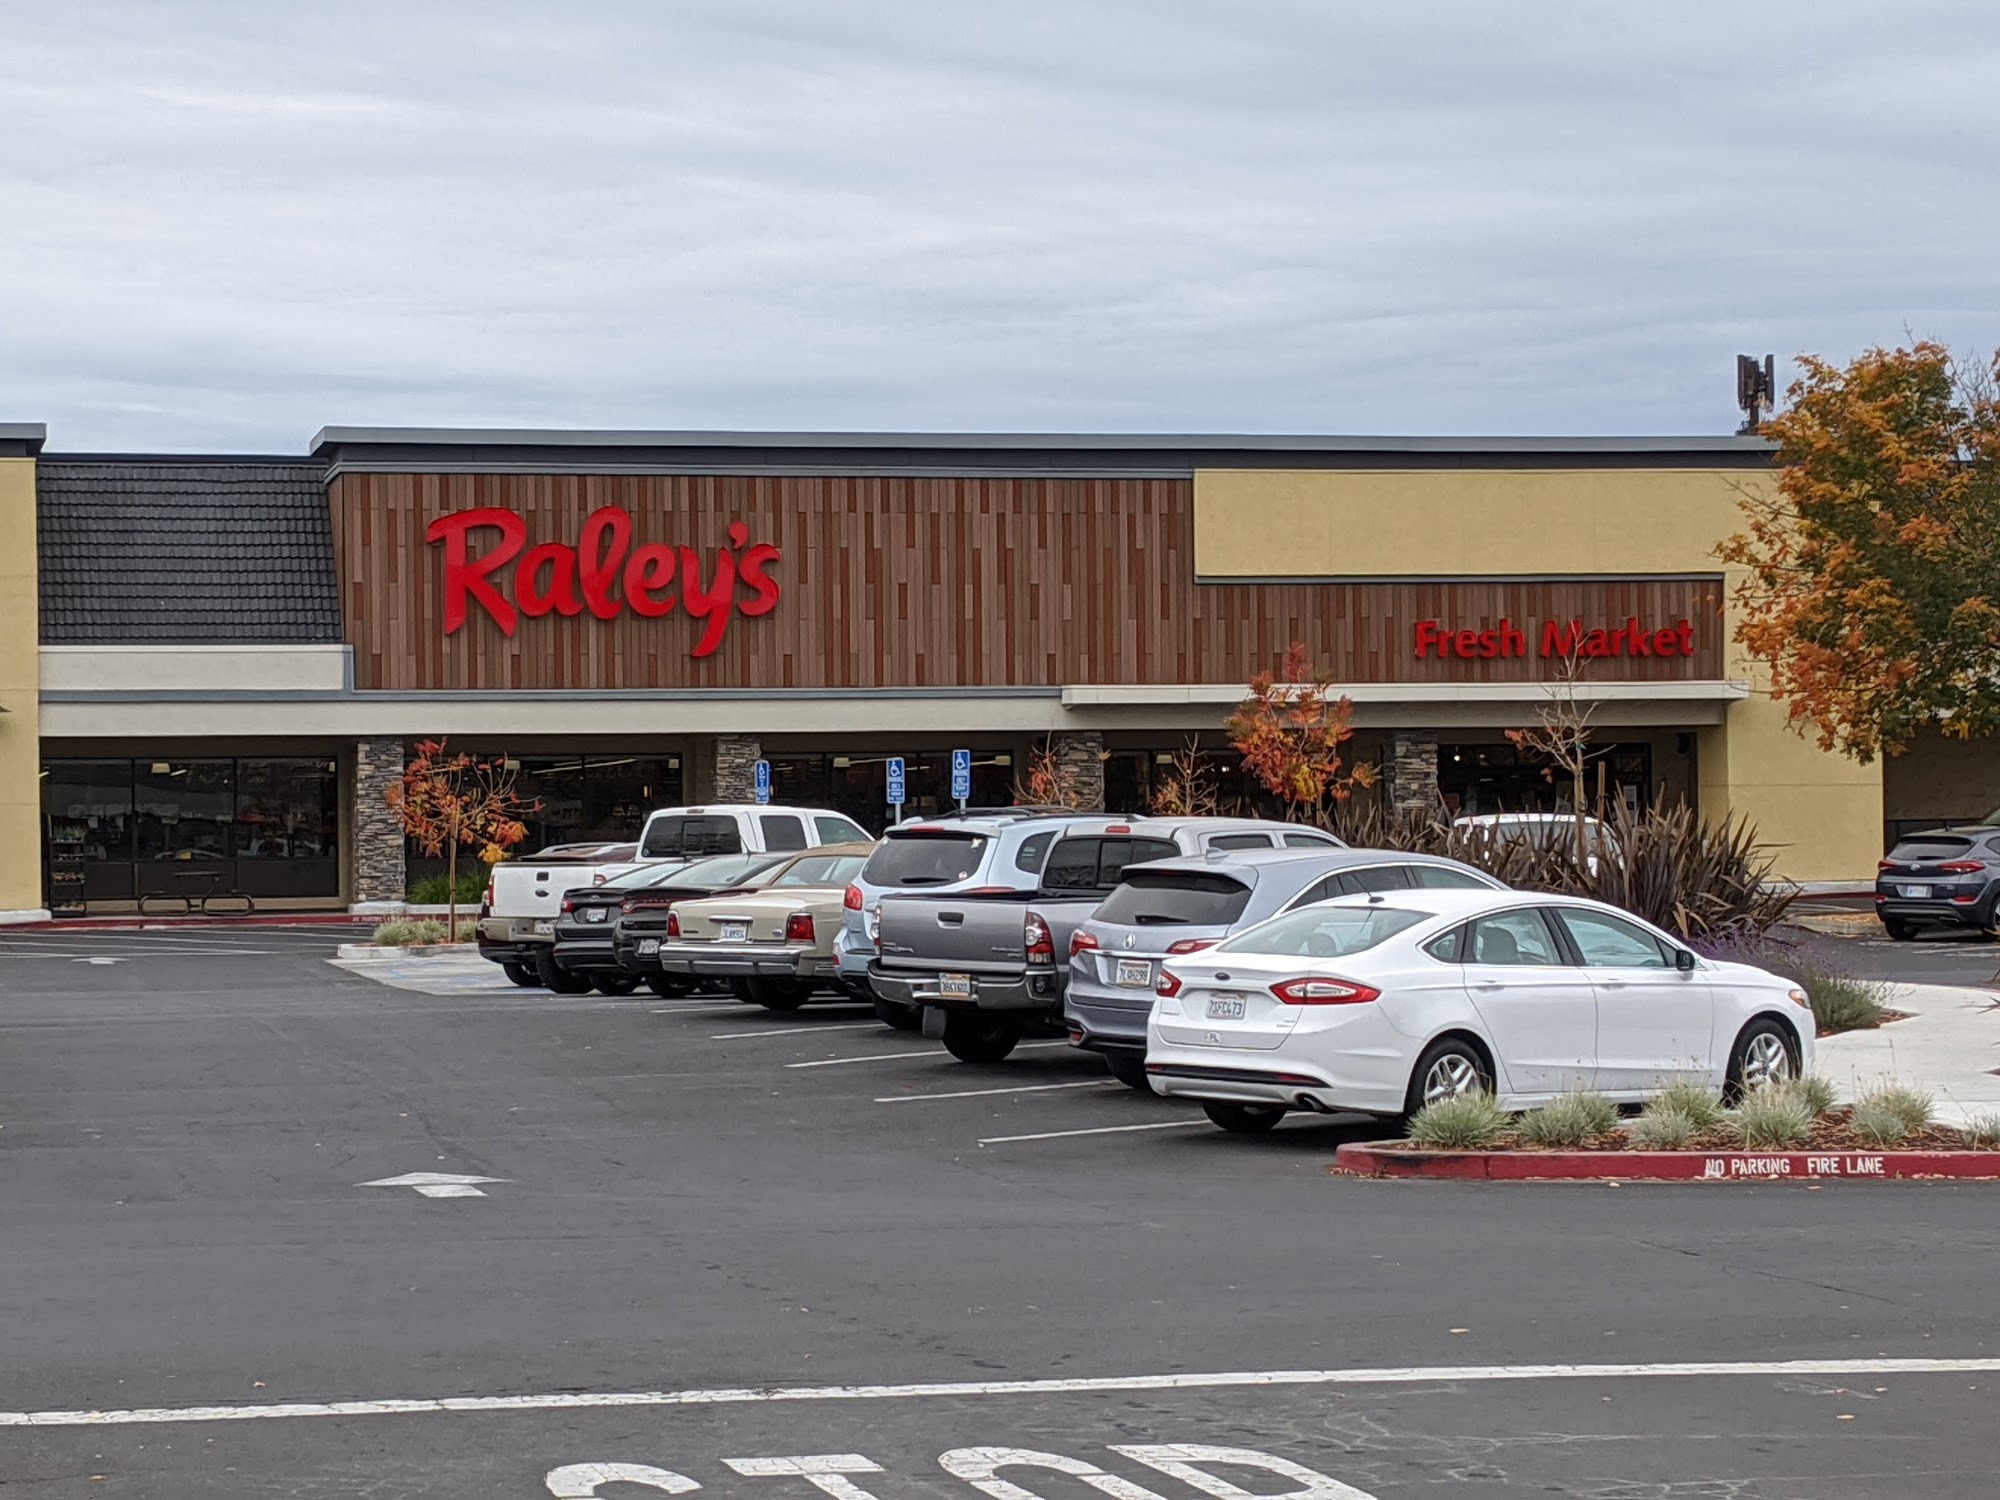 Raley's Towne Centre